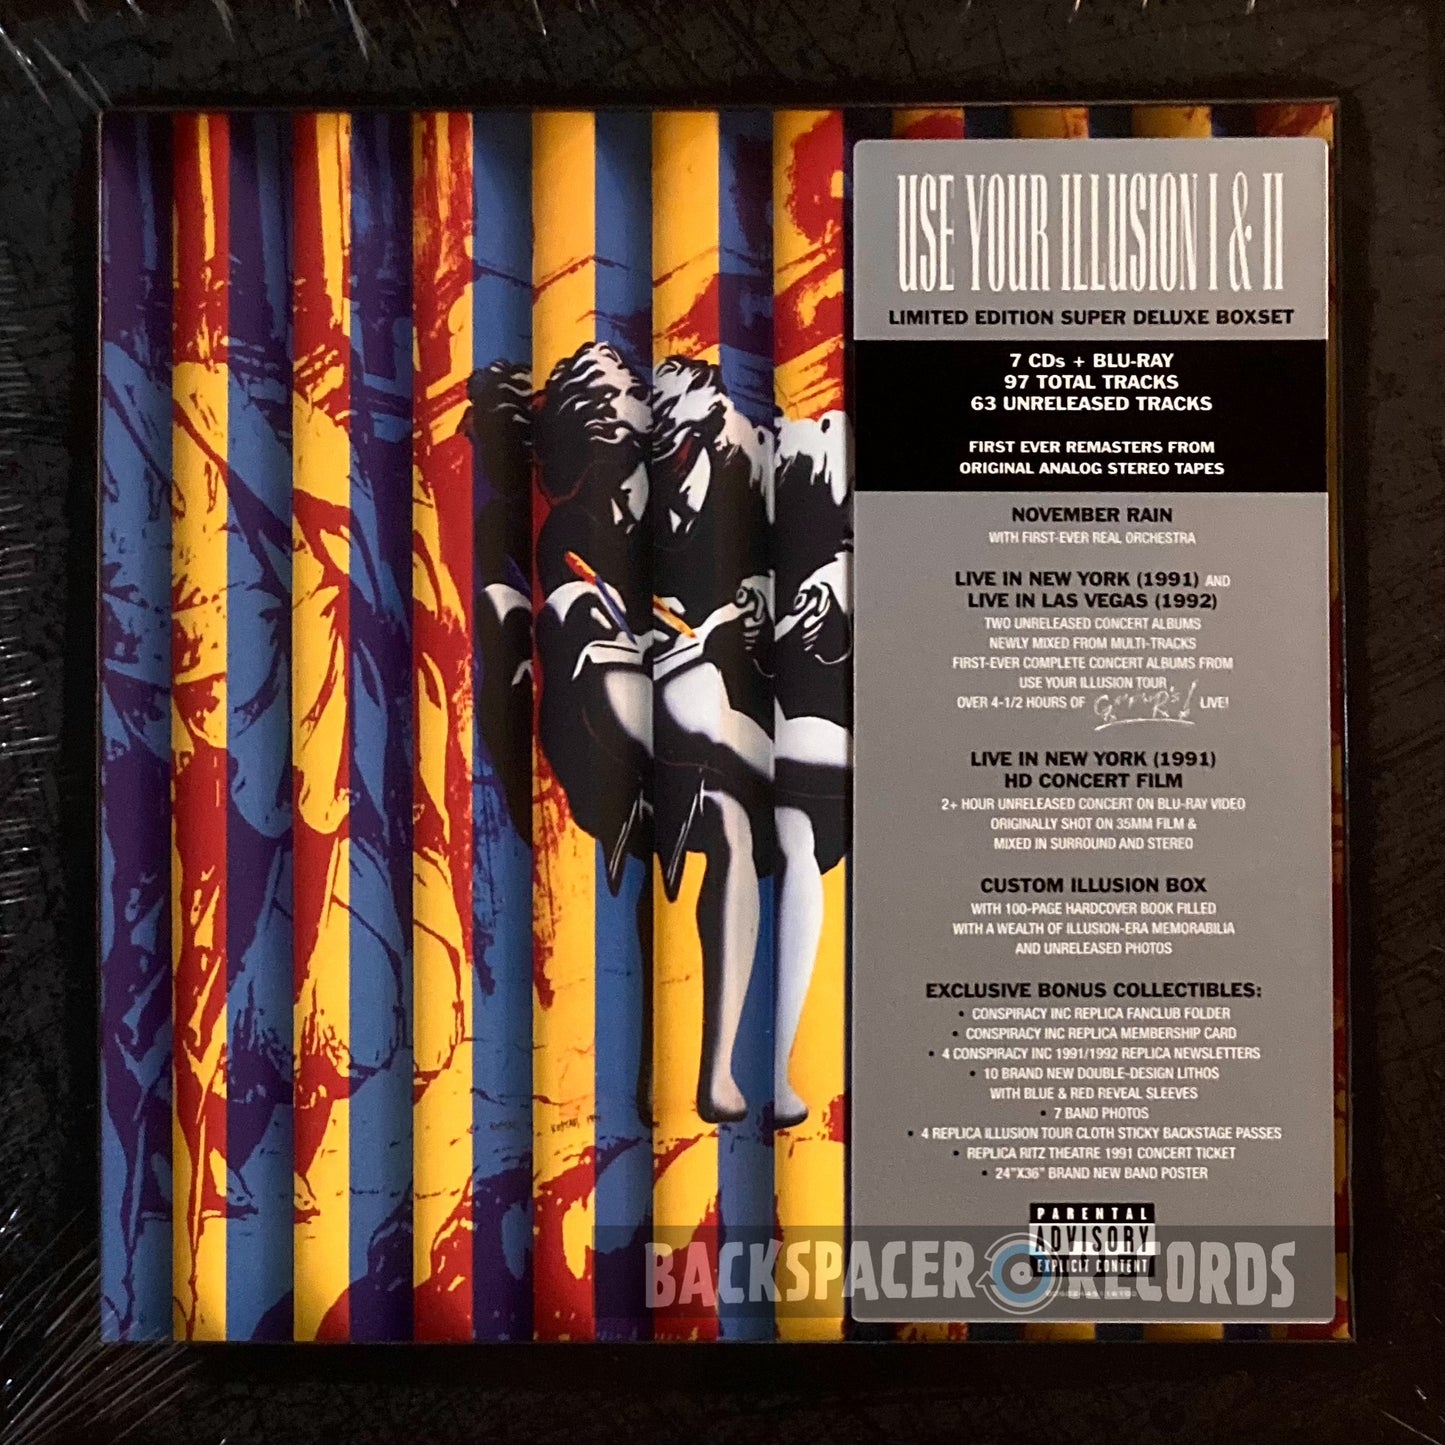 Guns N' Roses - Use Your Illusion (Limited Edition Super Deluxe Boxset) 7-CD + Blu-Ray (Sealed)